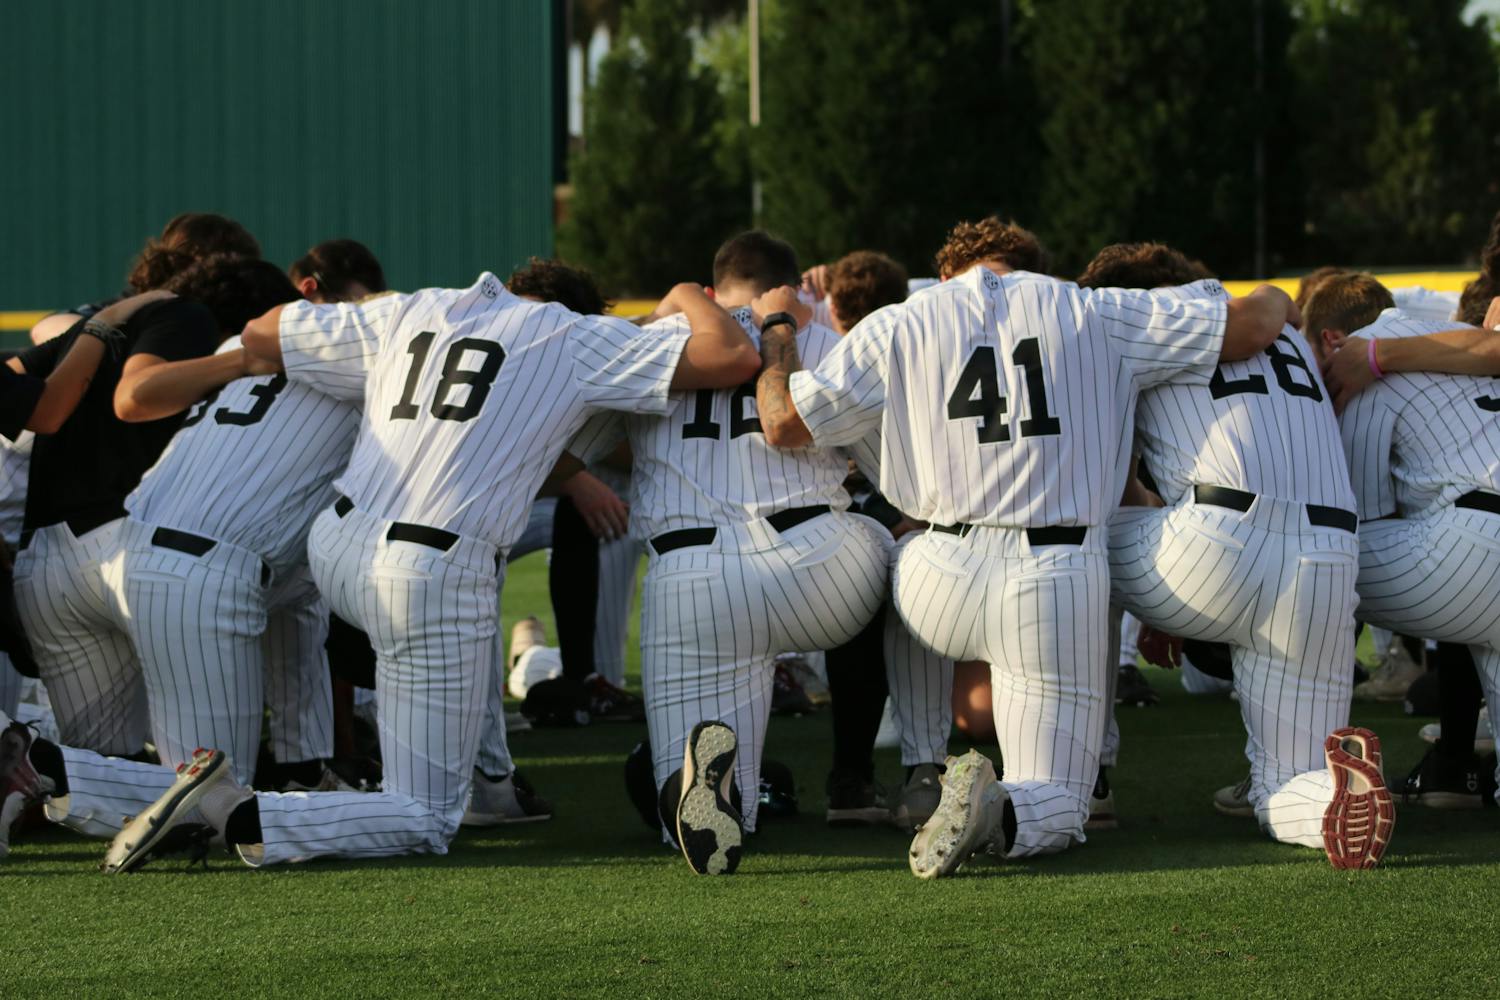 FILE — The University of South Carolina baseball team circles up prior to its game against the University of Florida on April 21, 2023. The Gamecocks defeated the Gators 5-2 and ended its season with a record of 42-21.